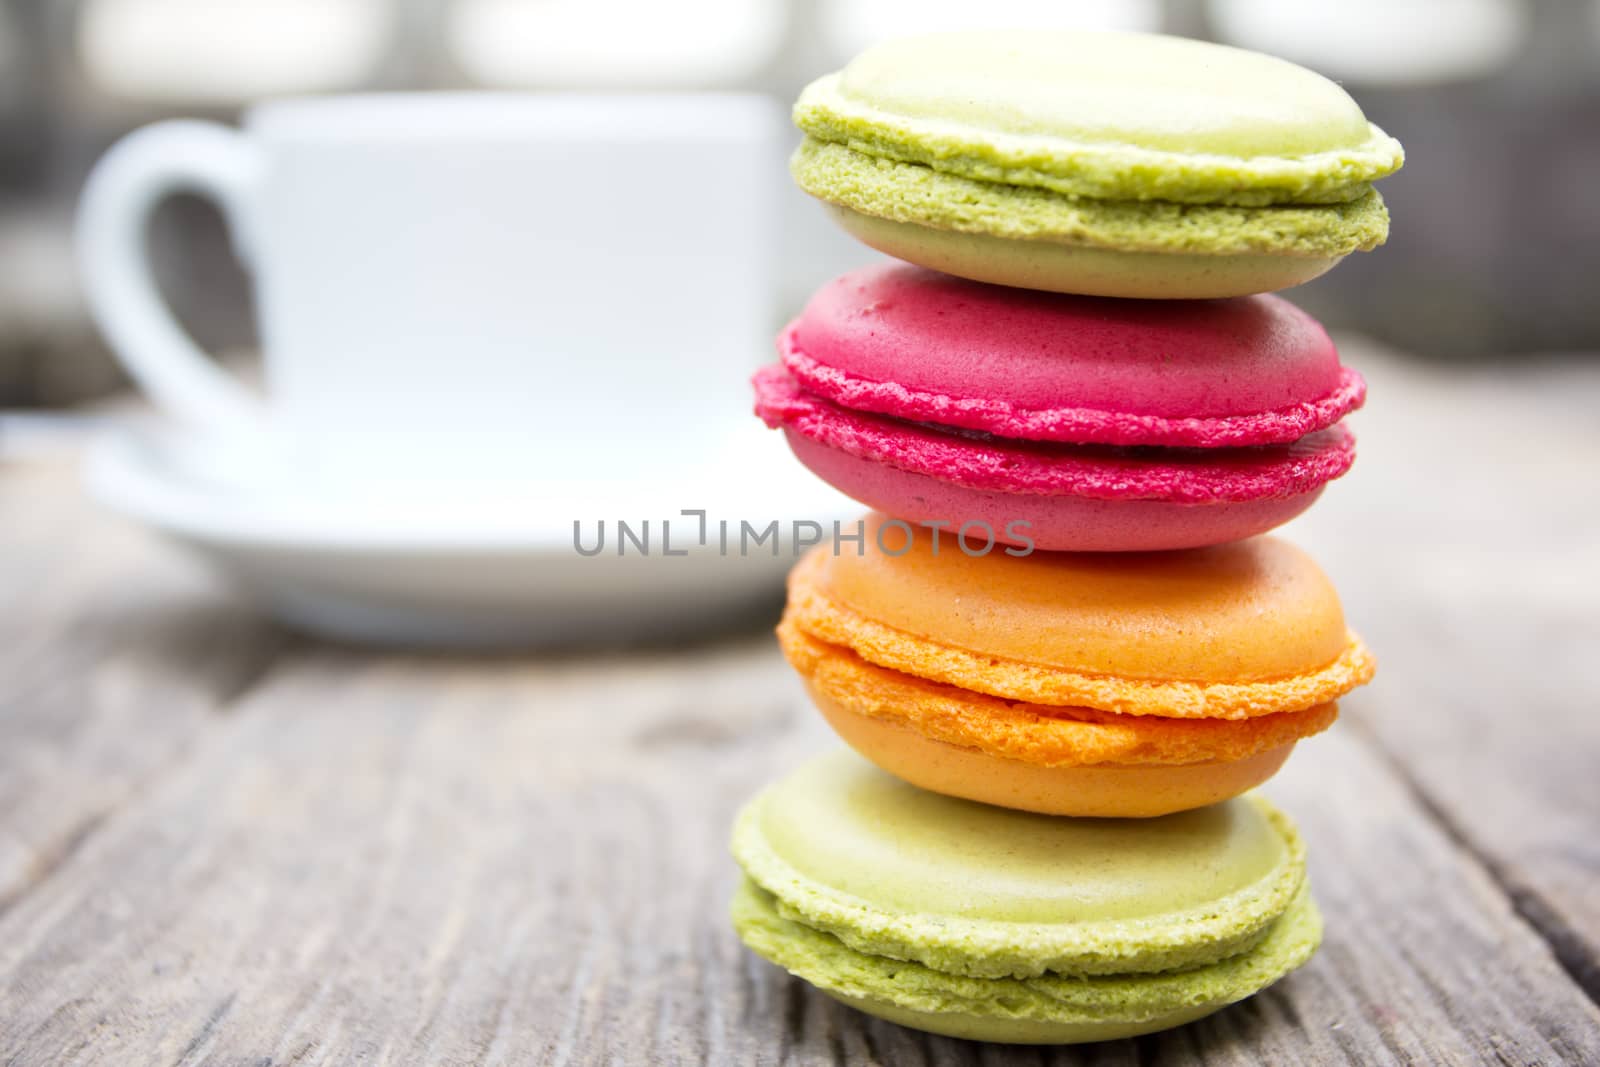 Macaroons on a wooden table with cup of coffee